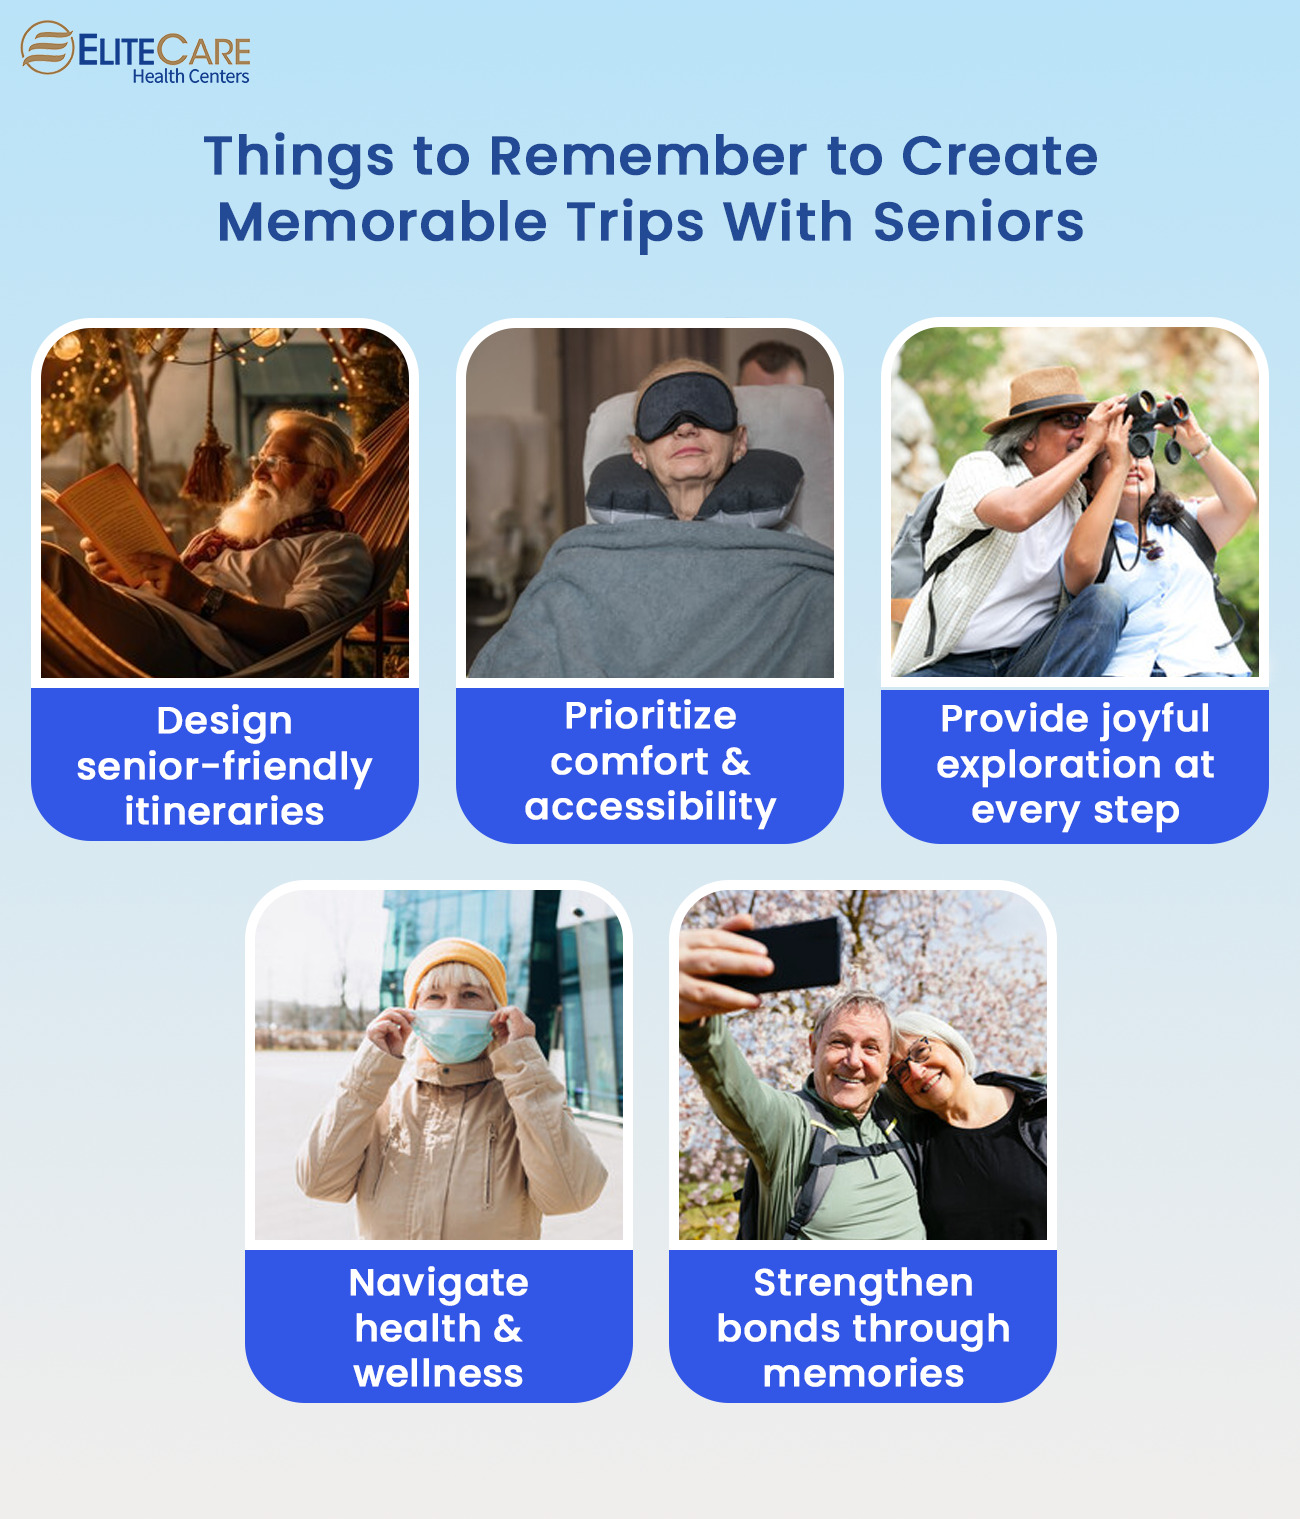 Things to Remember to Create Memorable Trips With Seniors